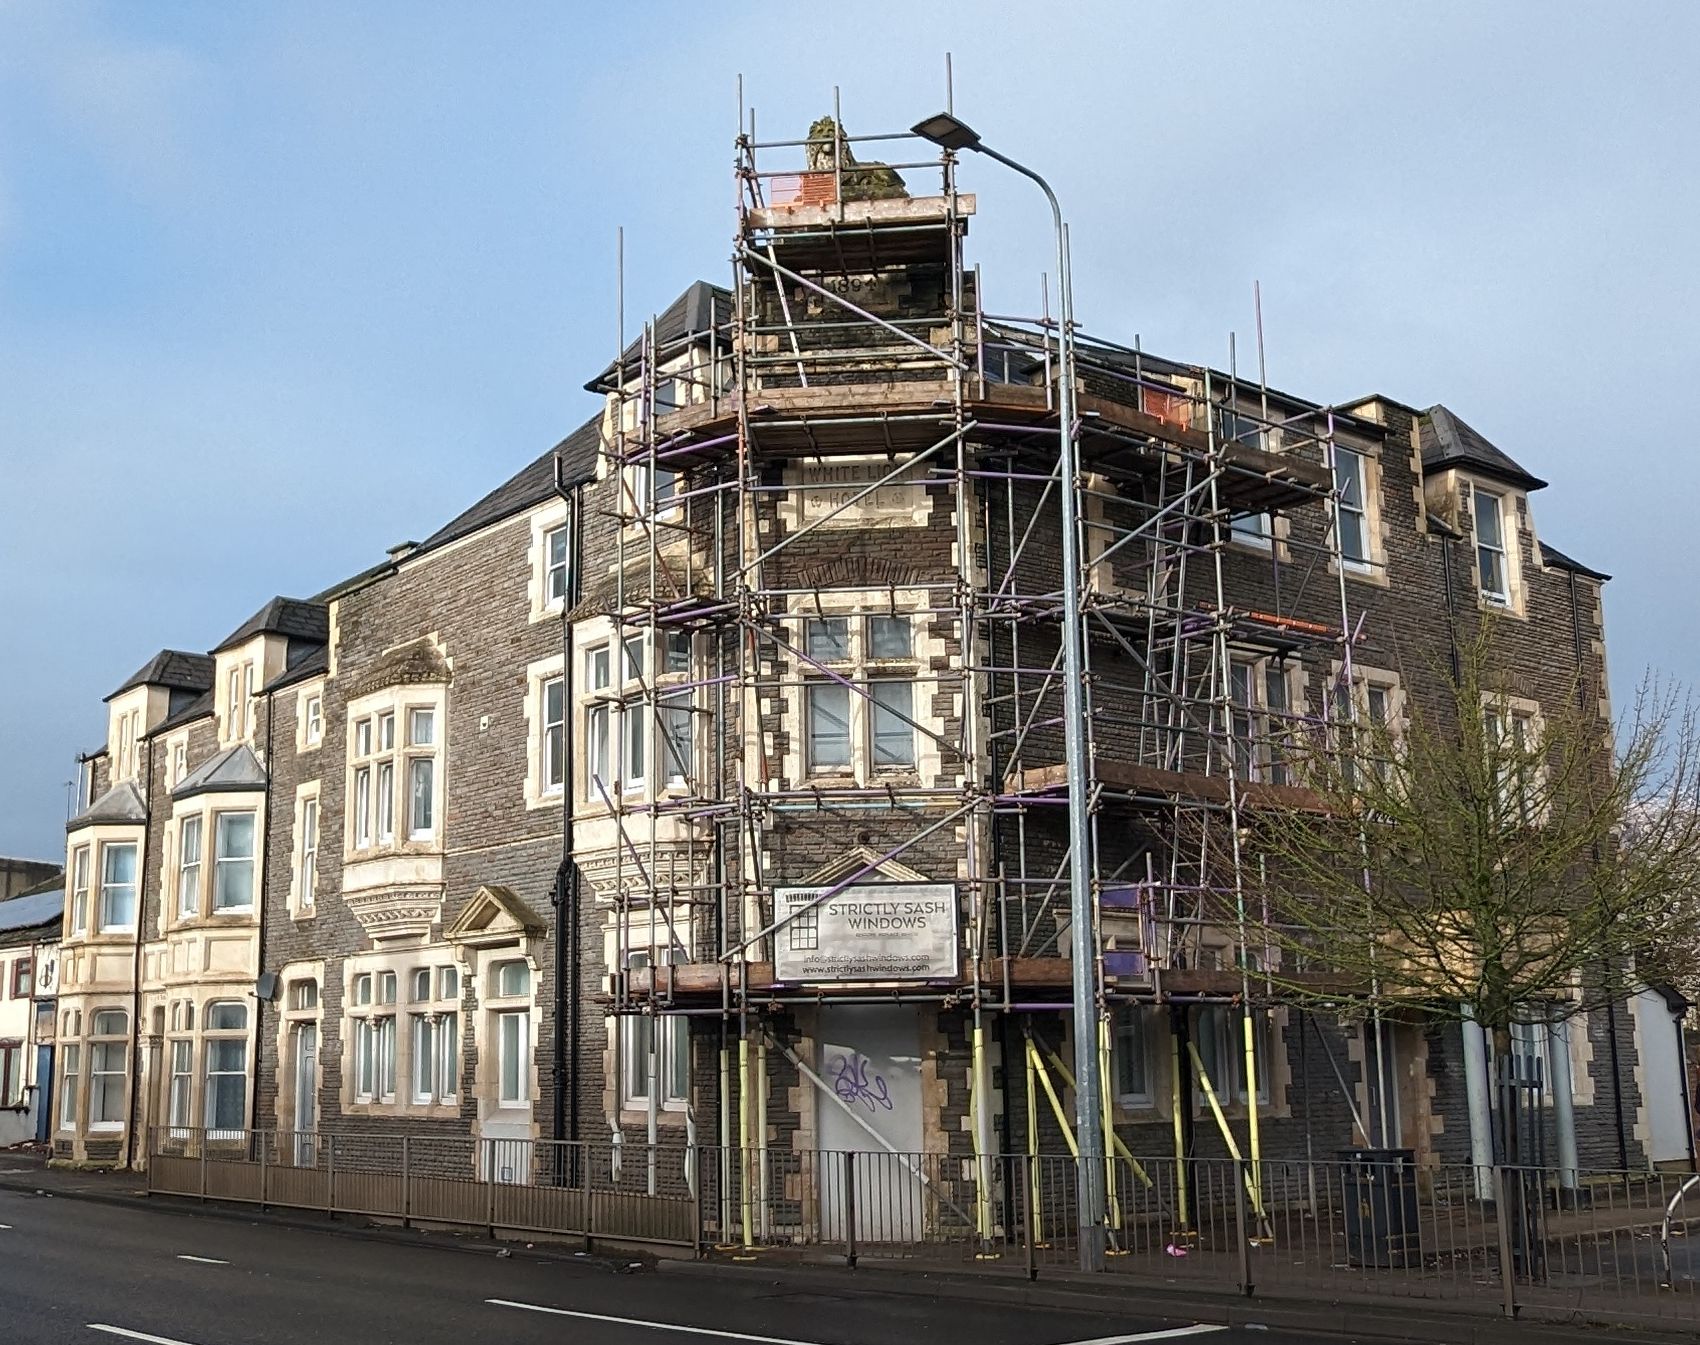 Photo of the former White Lion pub Cardiff